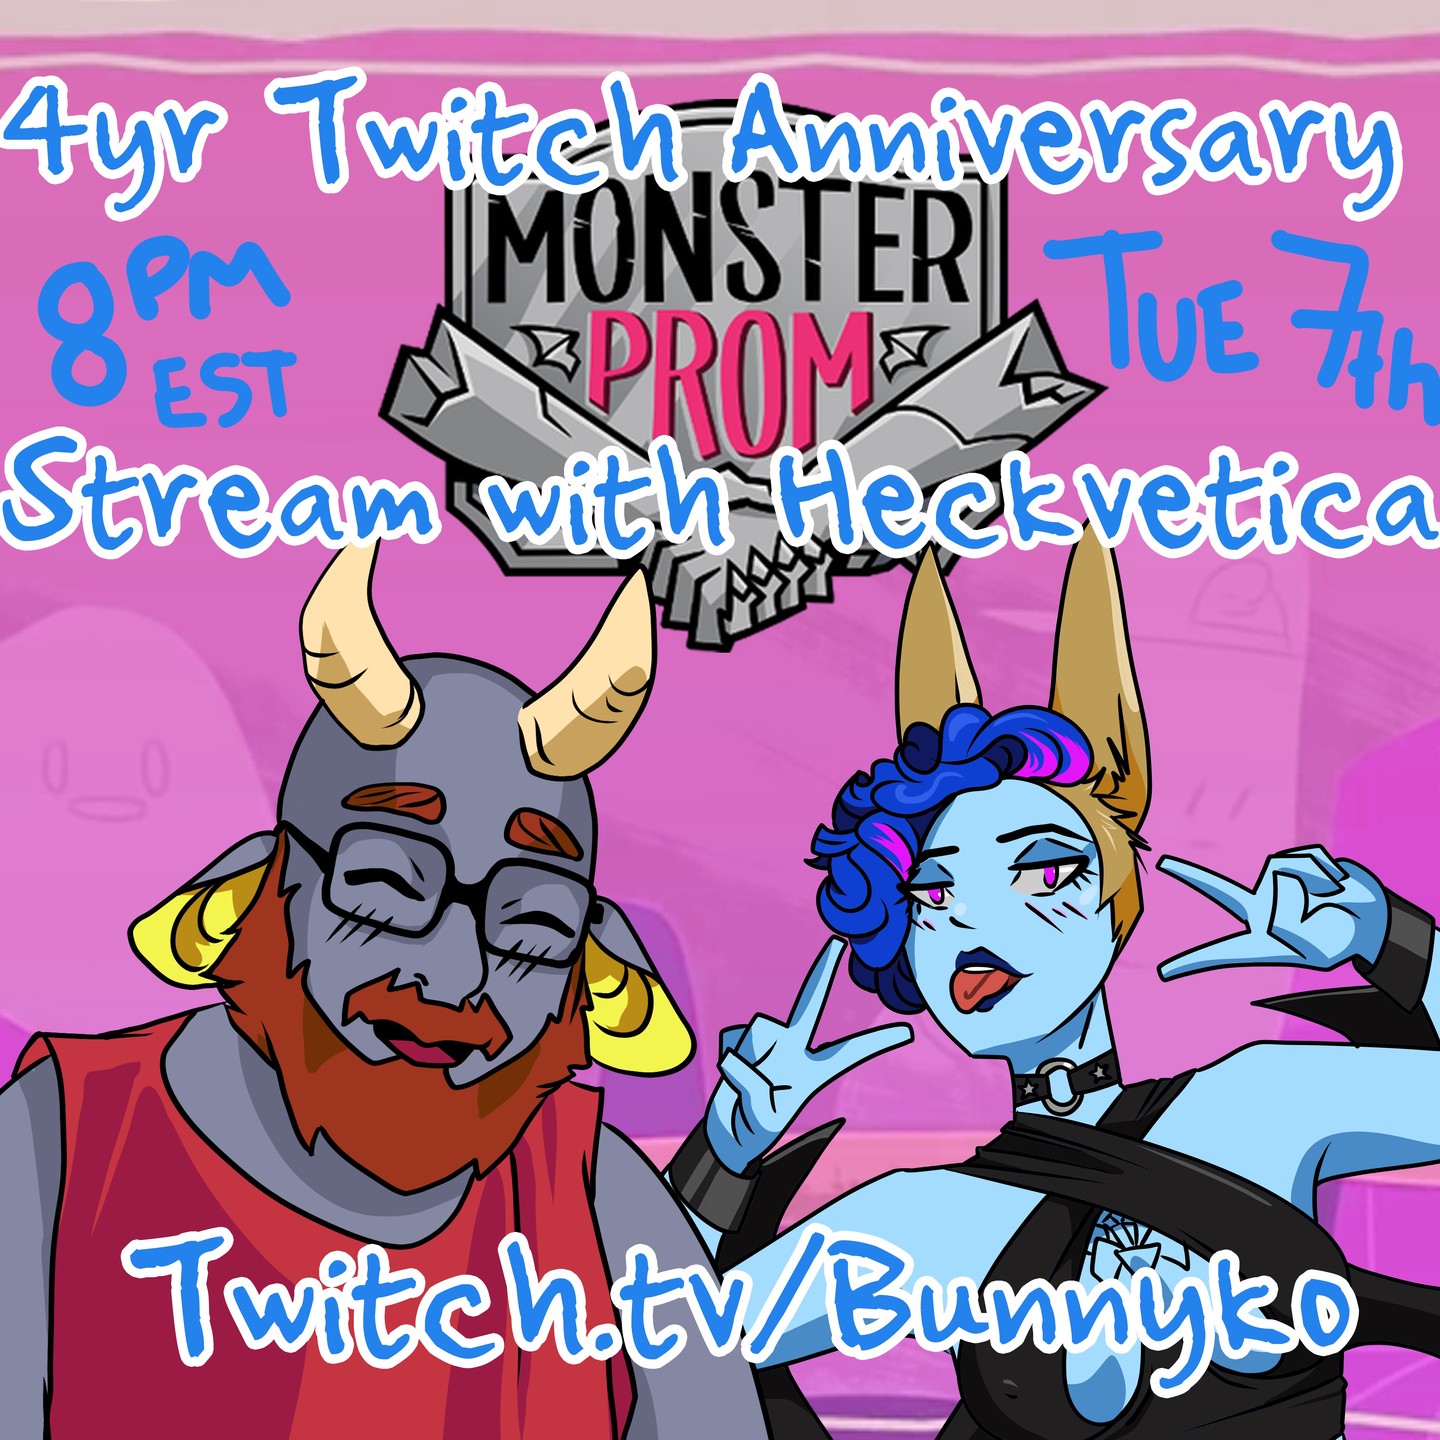 Join @ohheckvetica and me on Tuesday at 8pm and watch us play #MonsterProm in celebreation of my 4 year twitch affiliate anniversay! I have 659 followers and I'll be trying to get to 680!